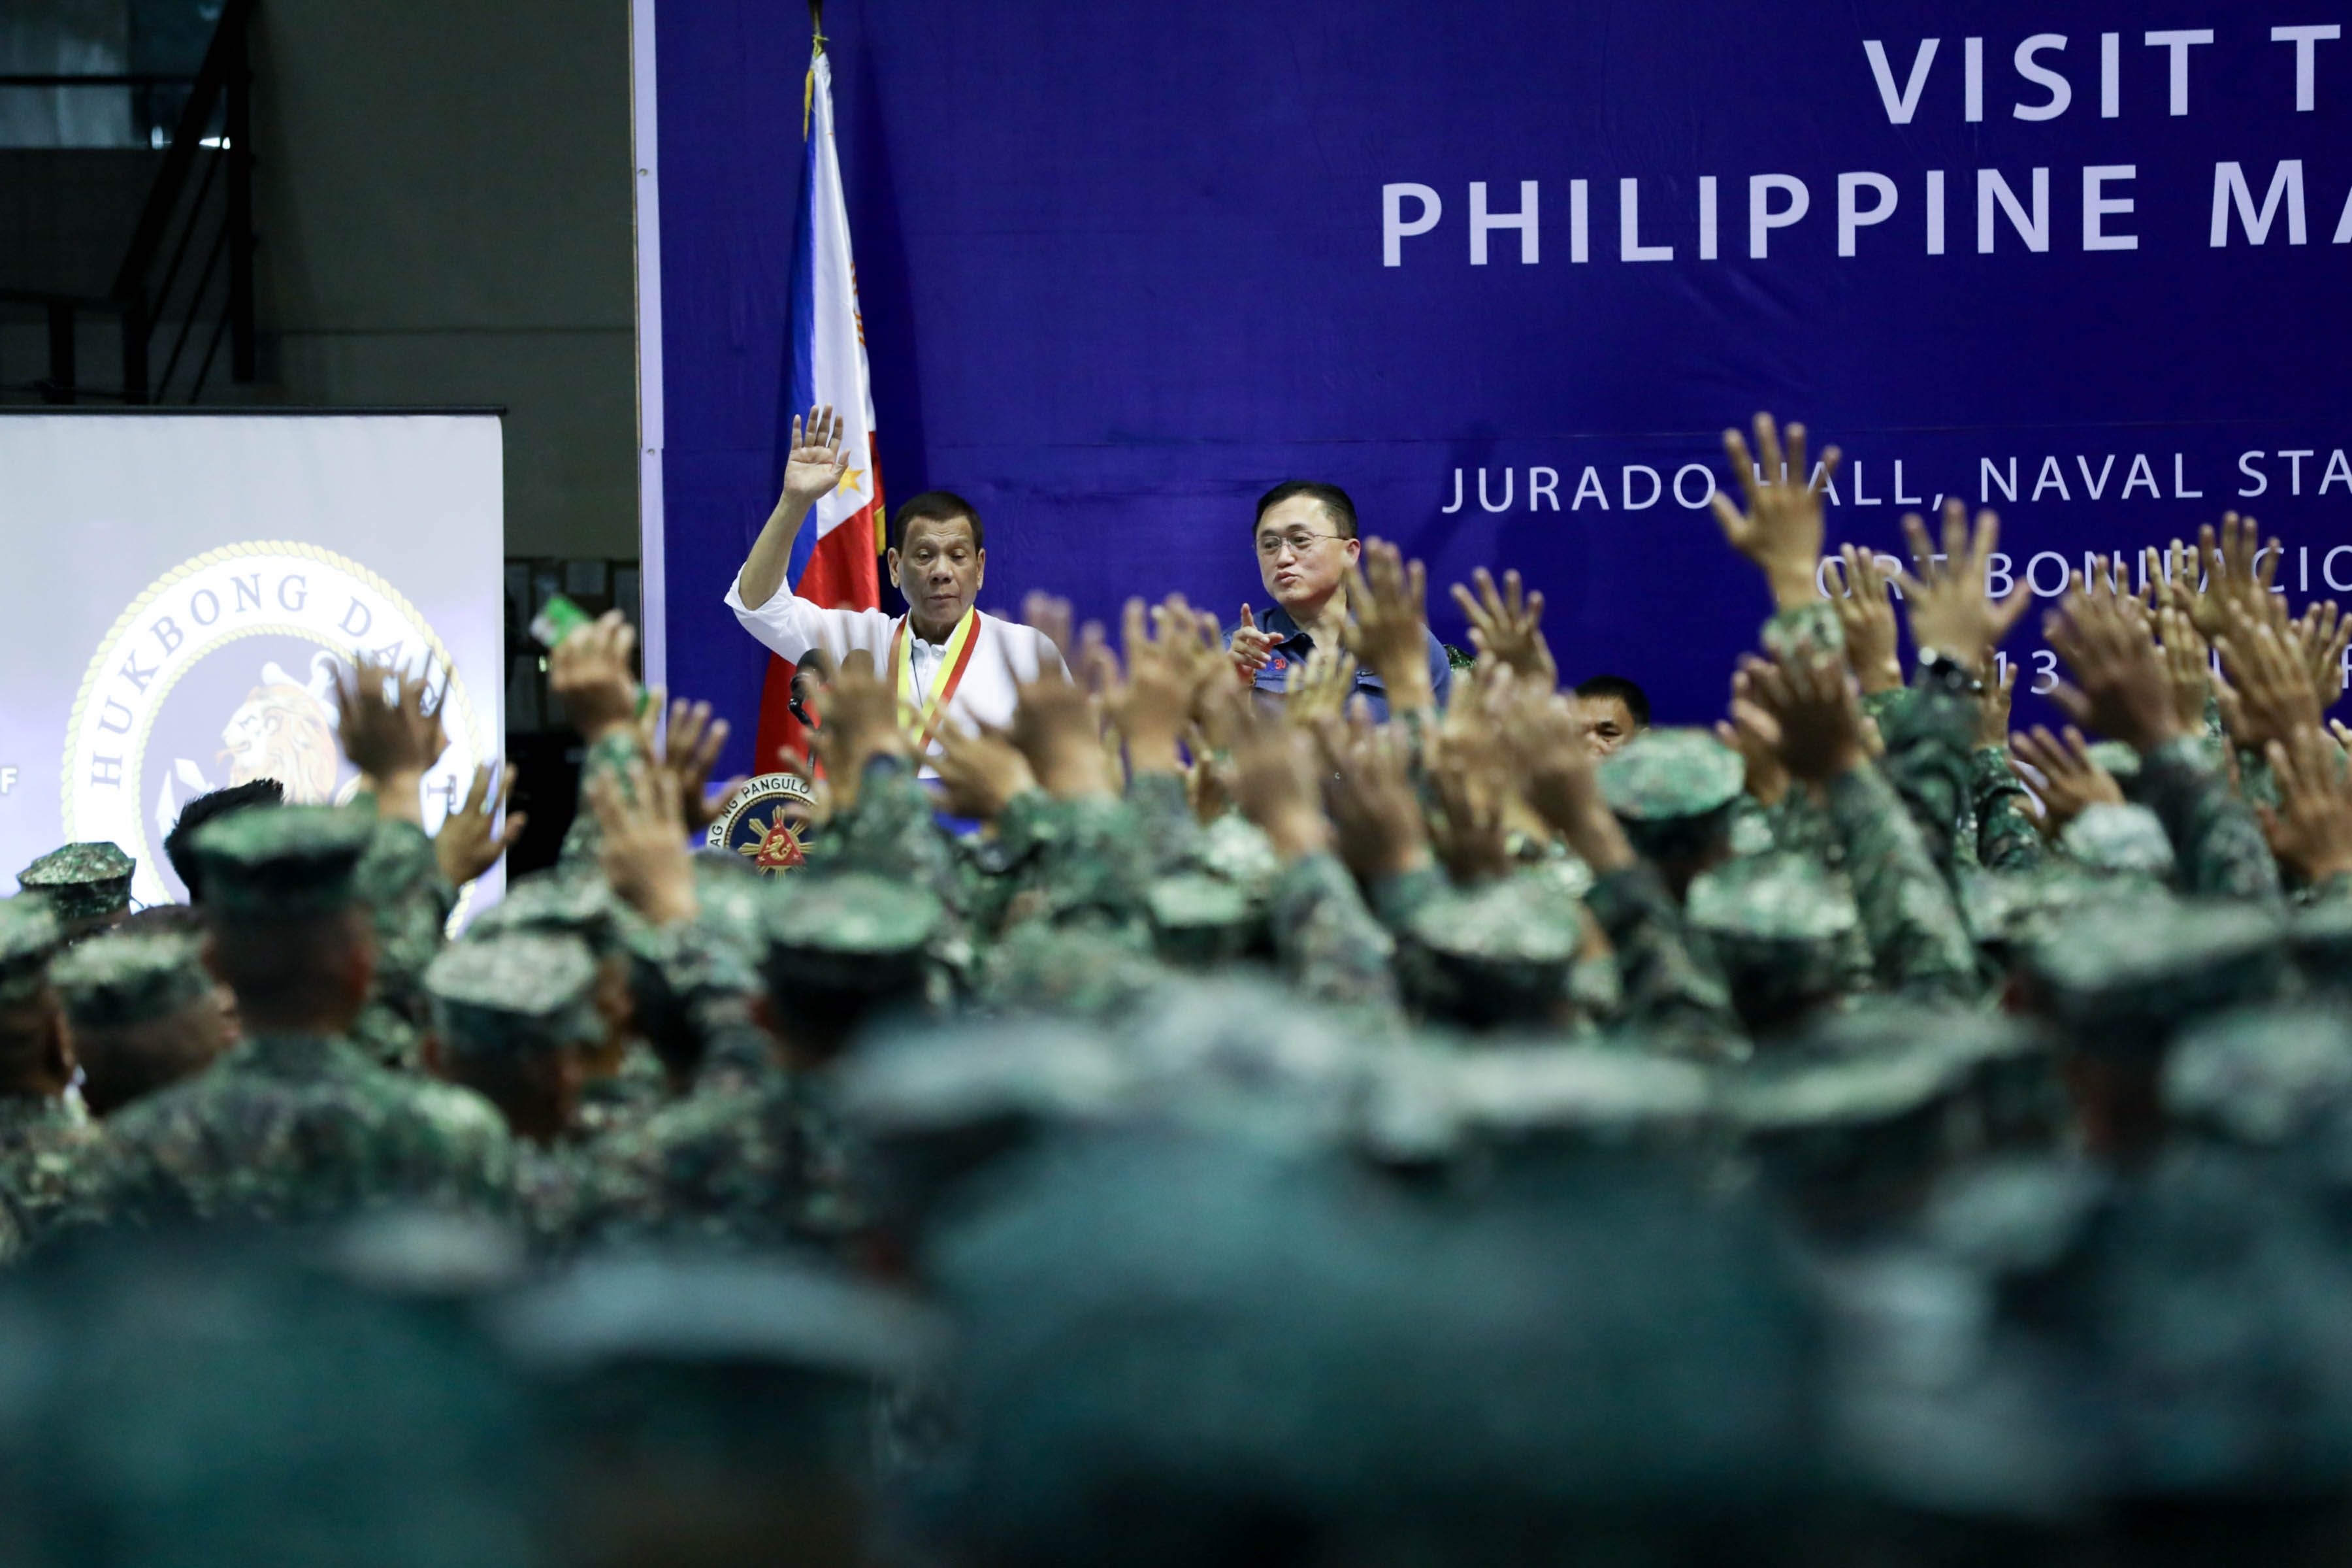 PH SOLDIERS. President Rodrigo Duterte delivers a speech during his visit to the Philippine Marine Corps headquarters at Fort Bonifacio in Taguig City on January 13, 2020. Malacañang photo  